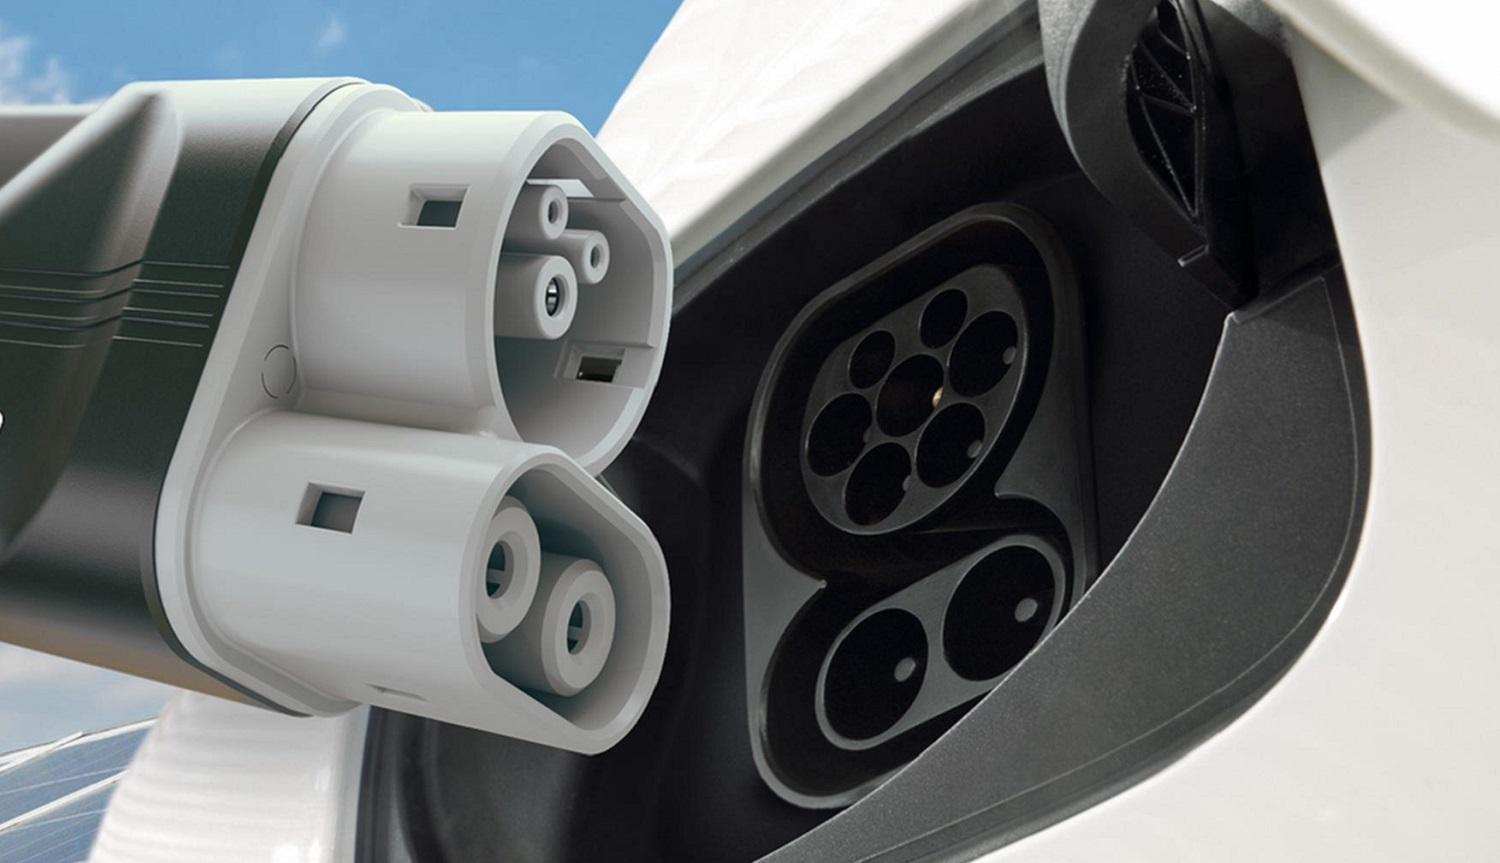 EV Basics - types of EV charging stations and connections